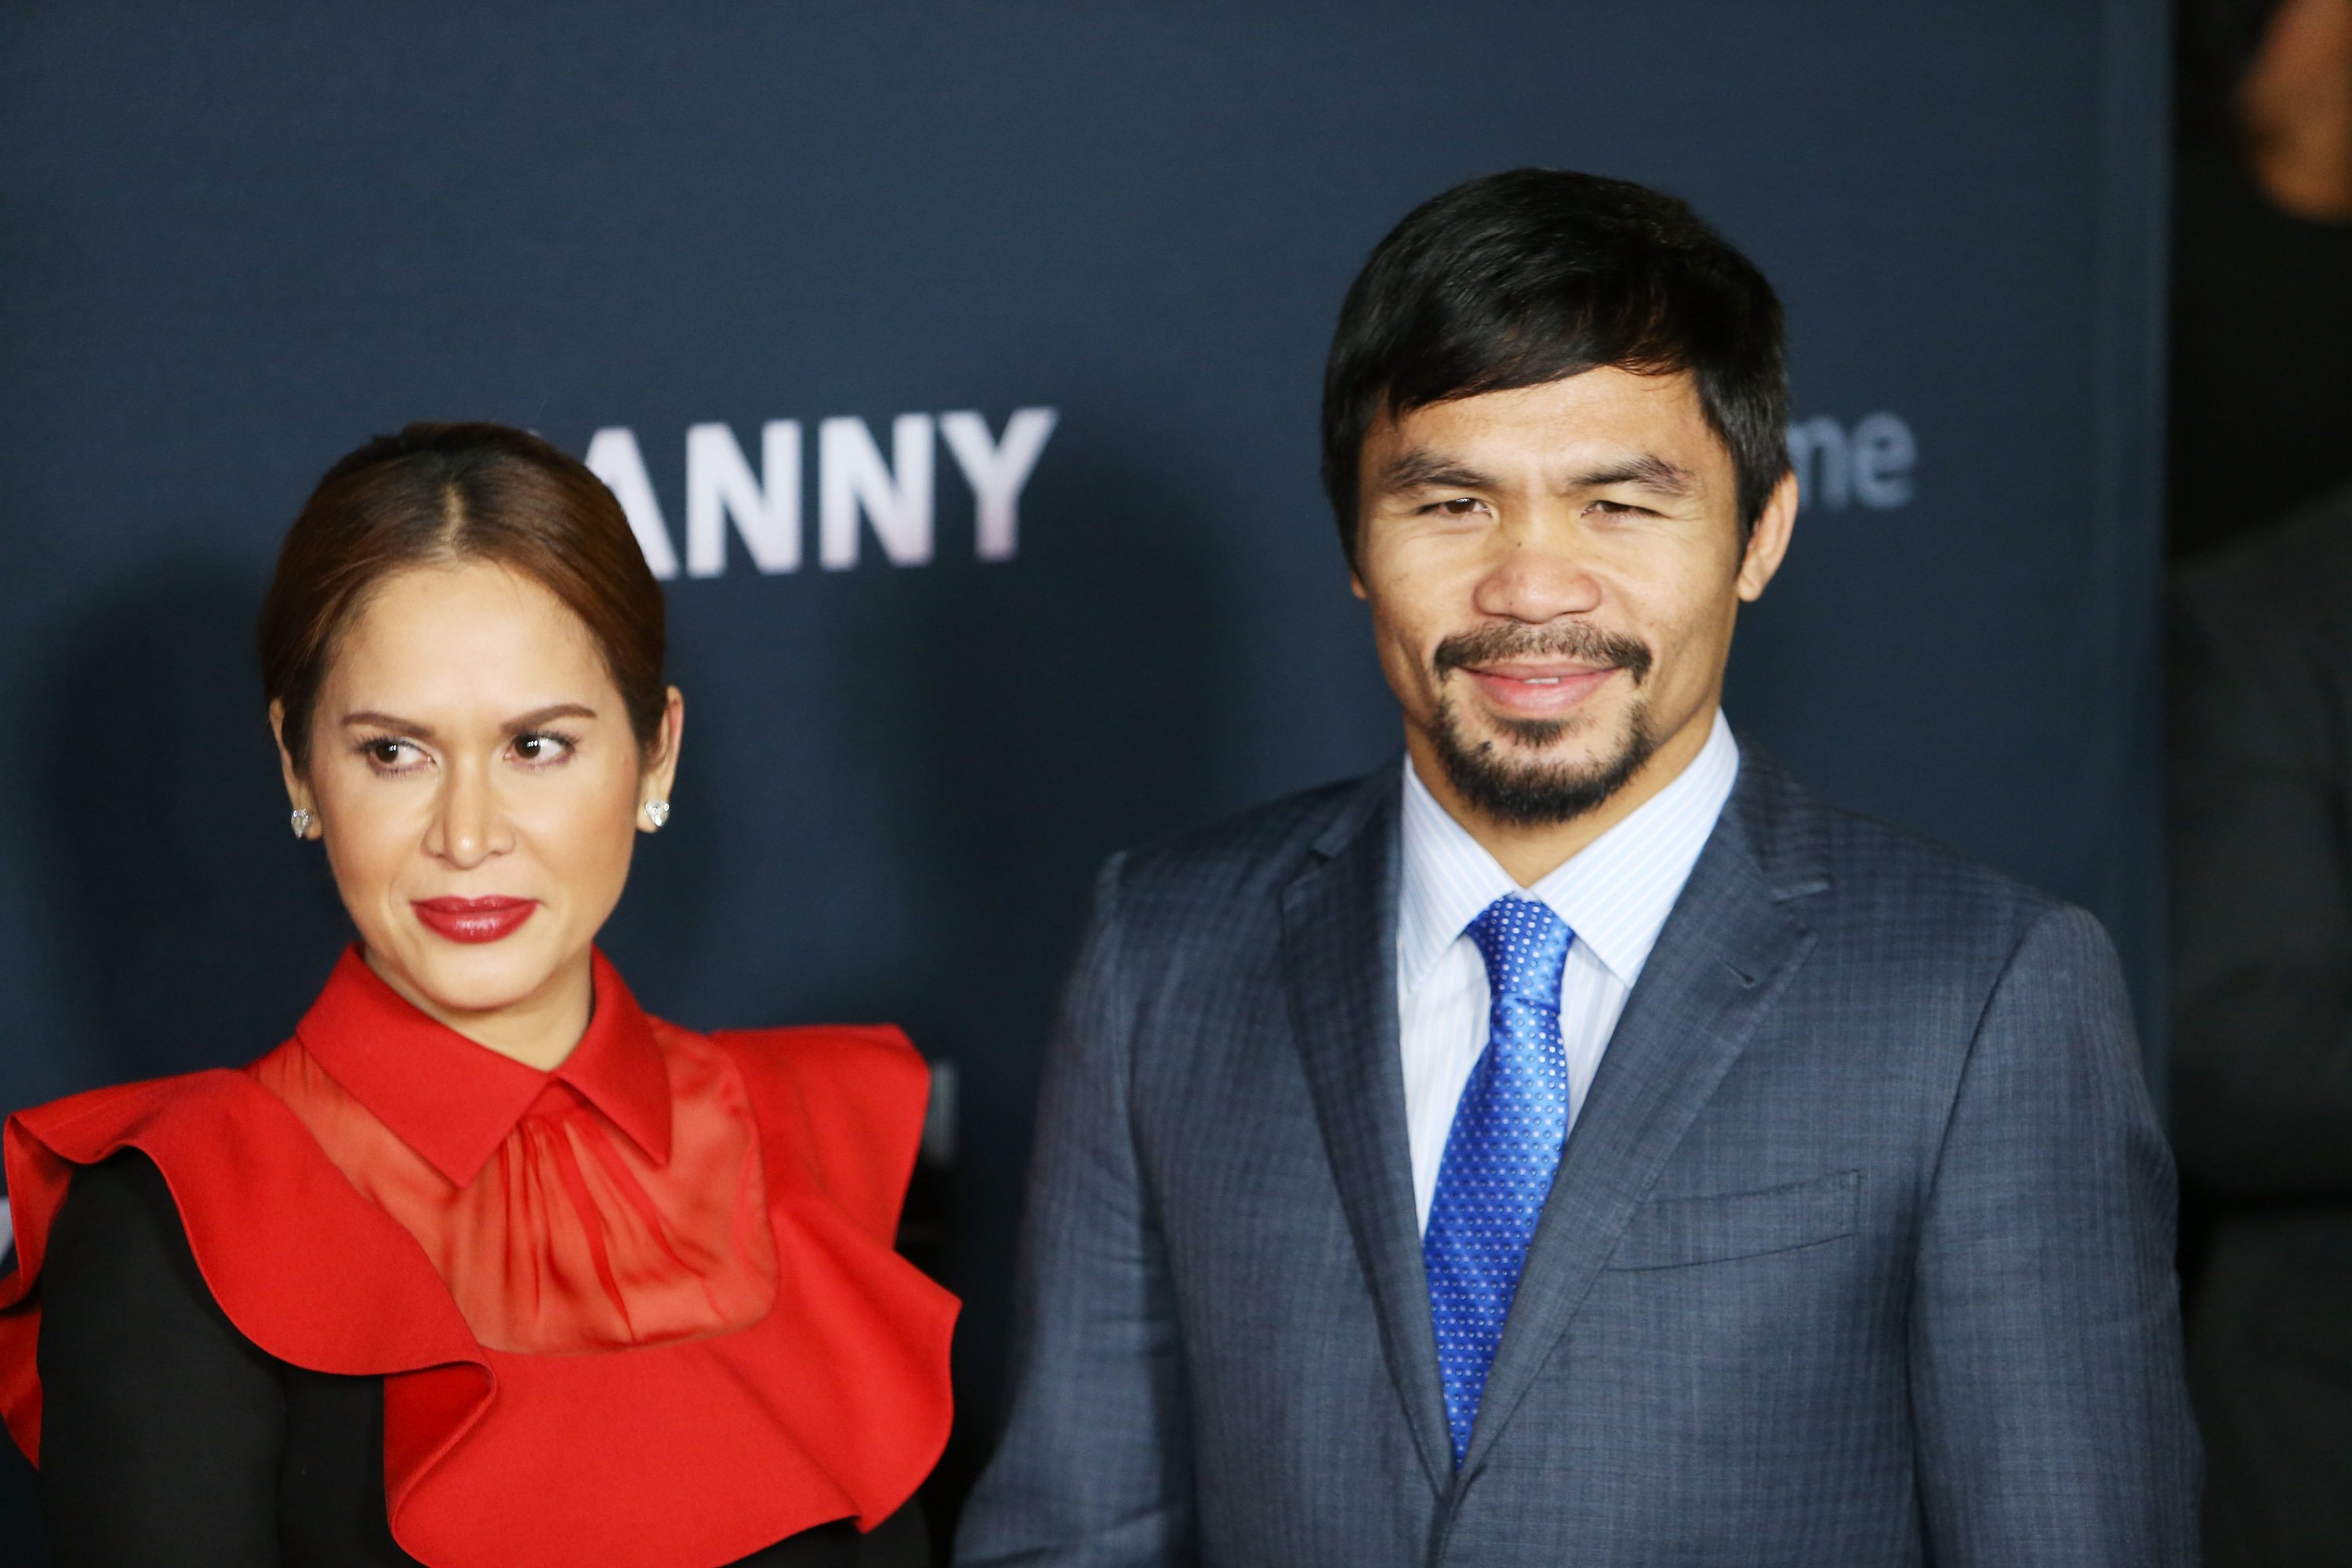  Manny Pacquiao and Jinkee Pacquiao arrive at the Los Angeles premiere of "Manny" on January 20, 2015 in Hollywood, California. | Source: Getty Images